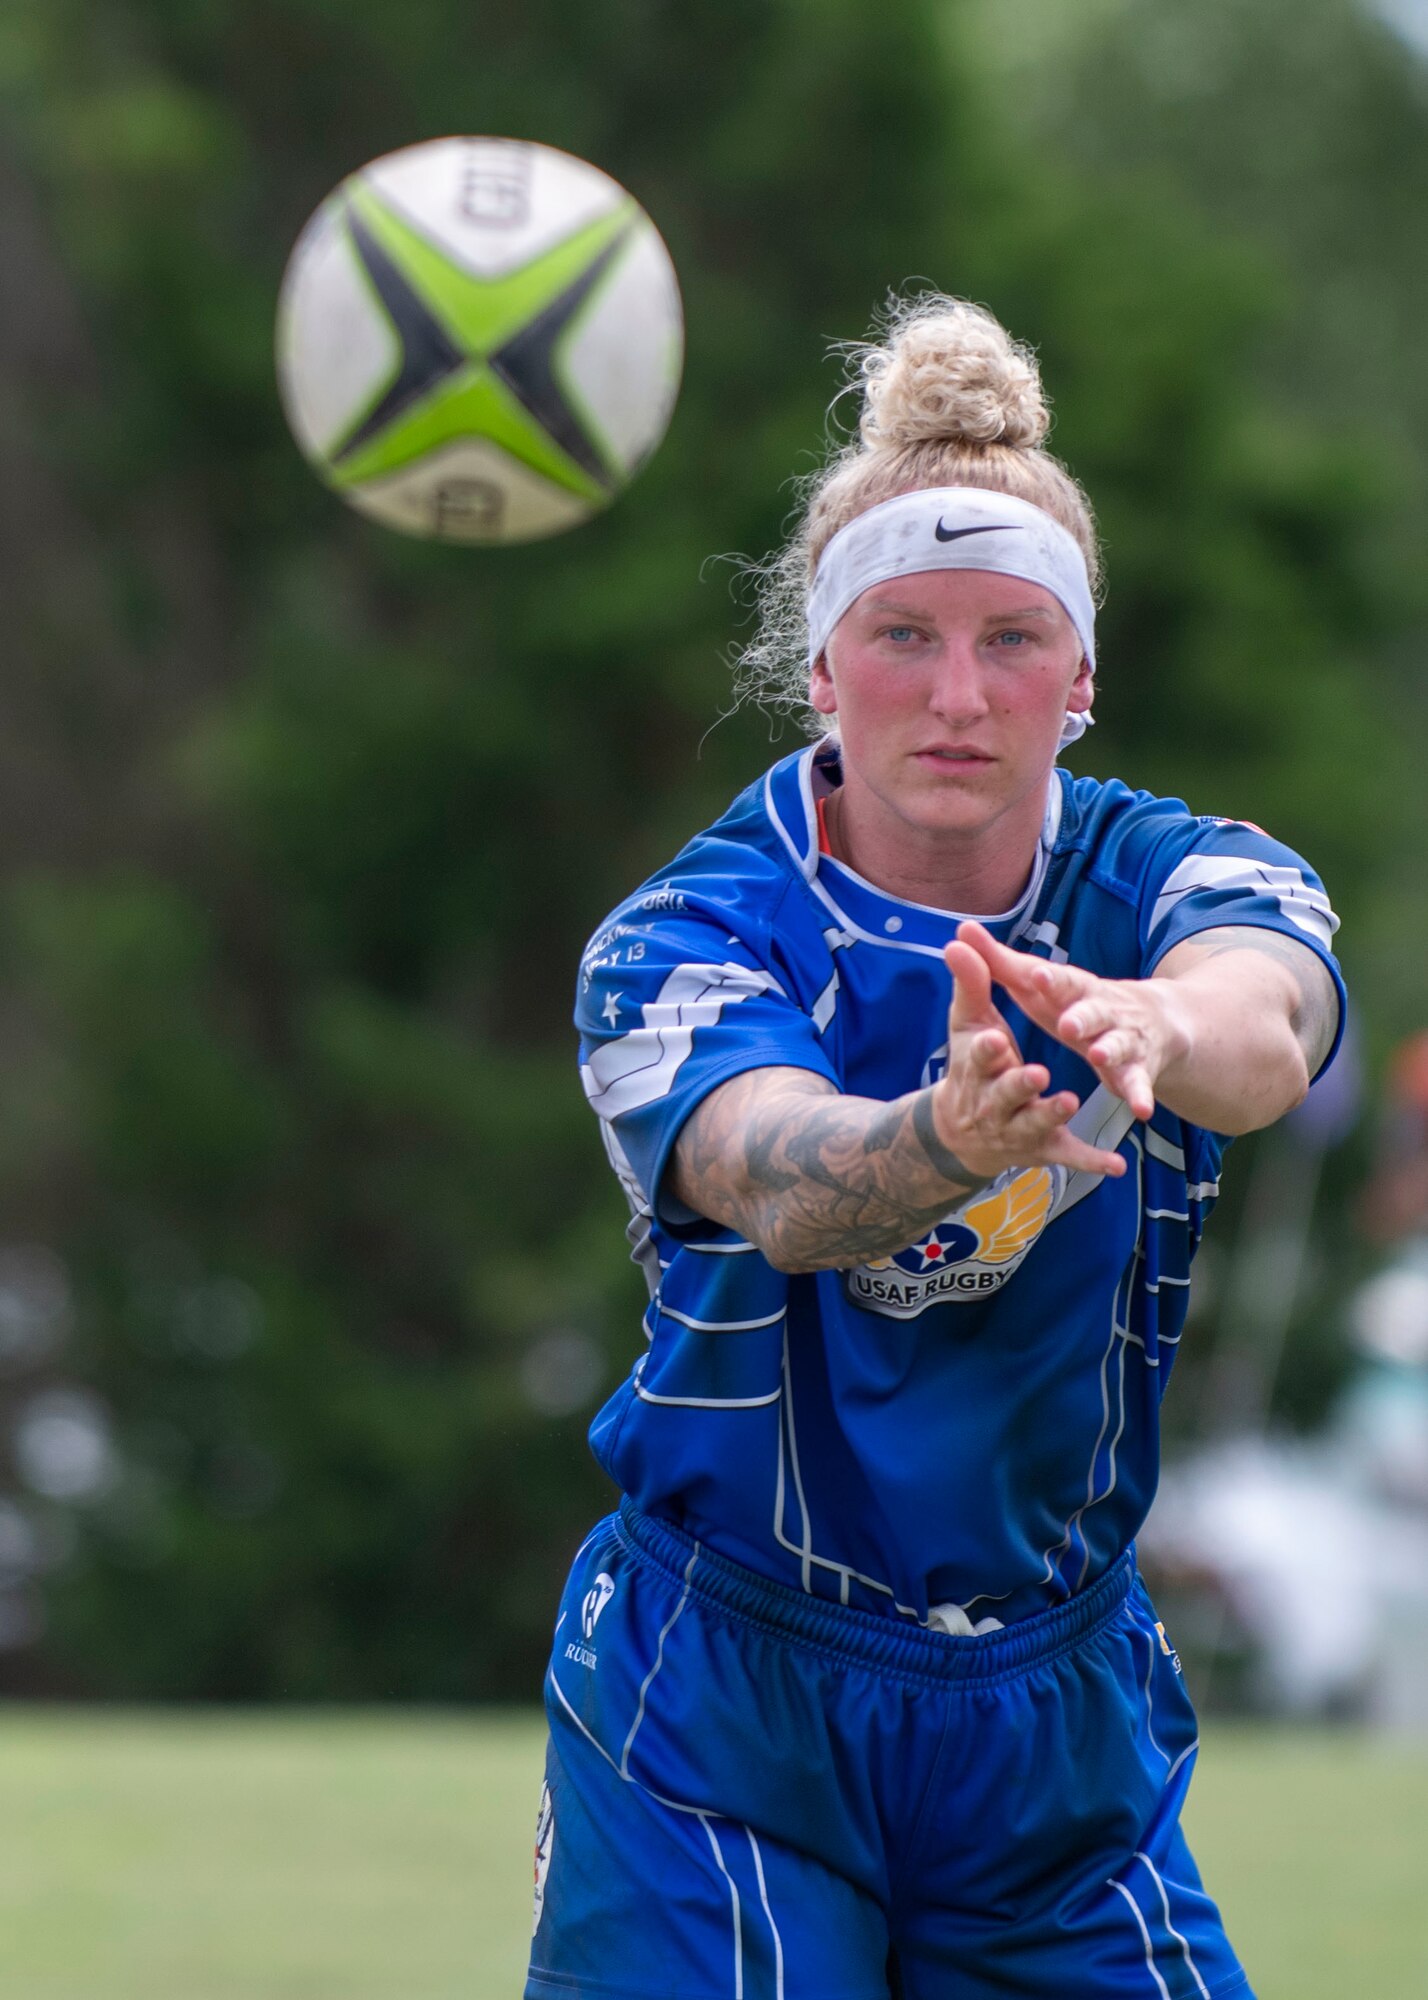 Staff Sgt. Camille Bartlett, United States Air Force women’s rugby player, passes the ball at the Annual Armed Forces Women’s Rugby Championship in Wilmington, North Carolina, June 26, 2021.